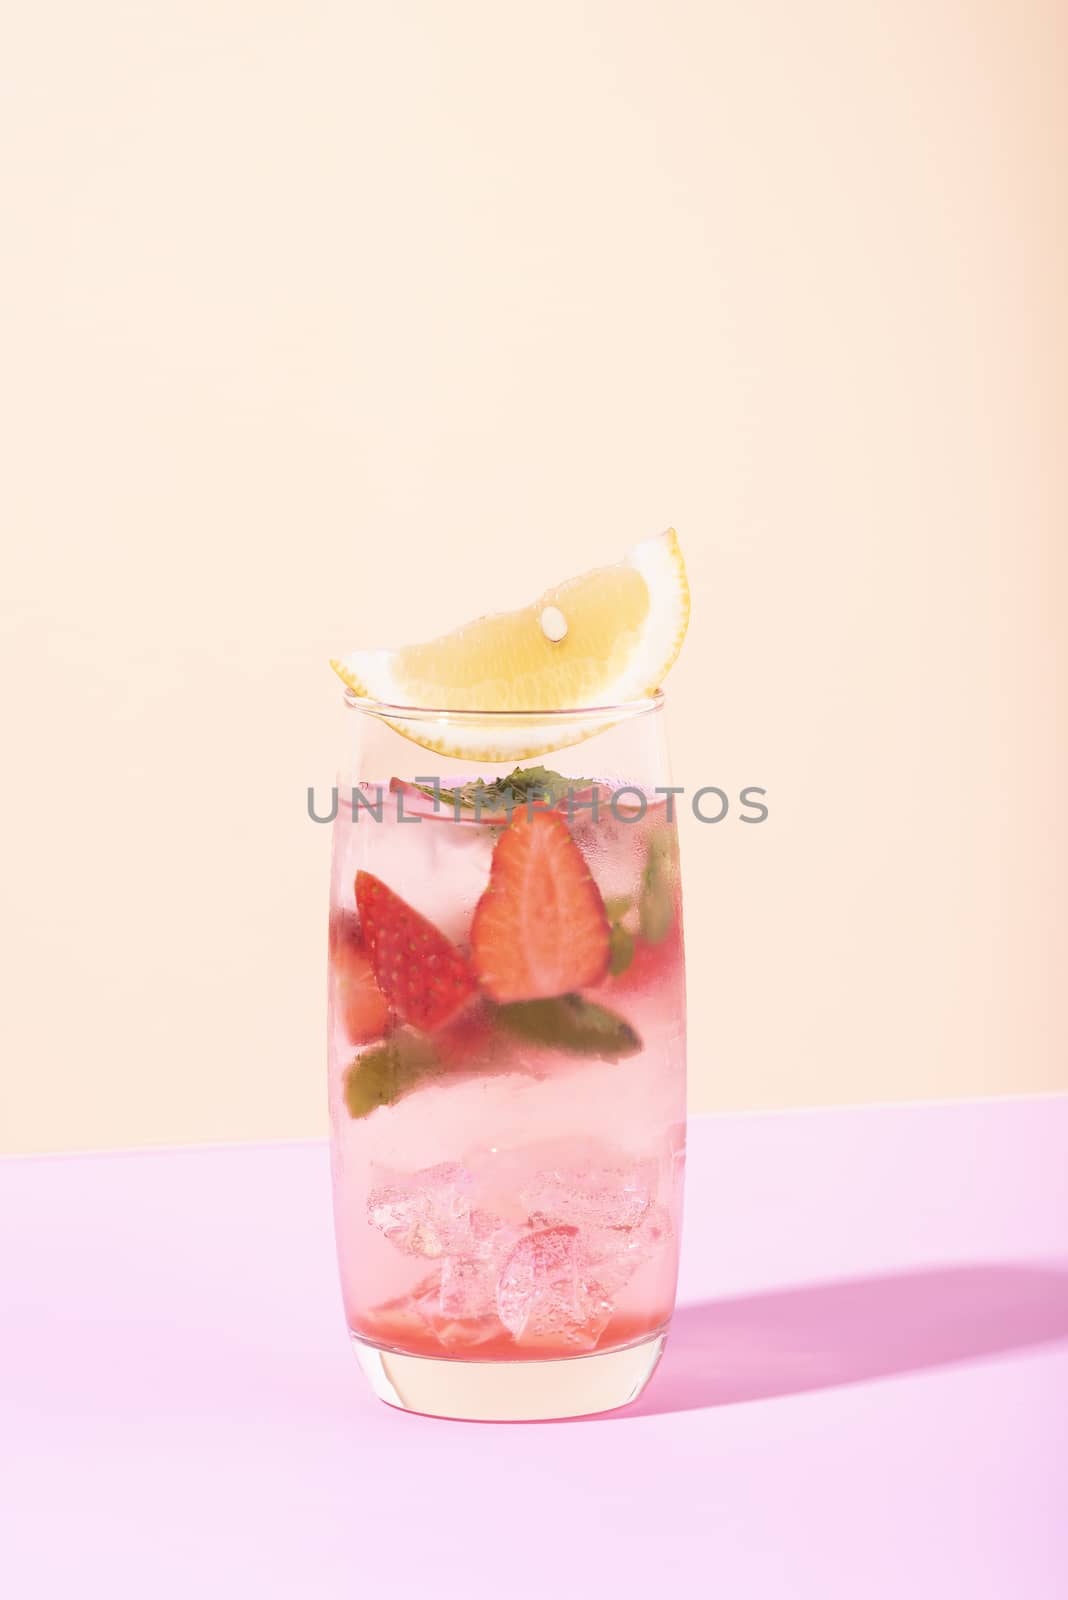 iced strawberry punch cocktail in glass with lemon on color background. summer drink.